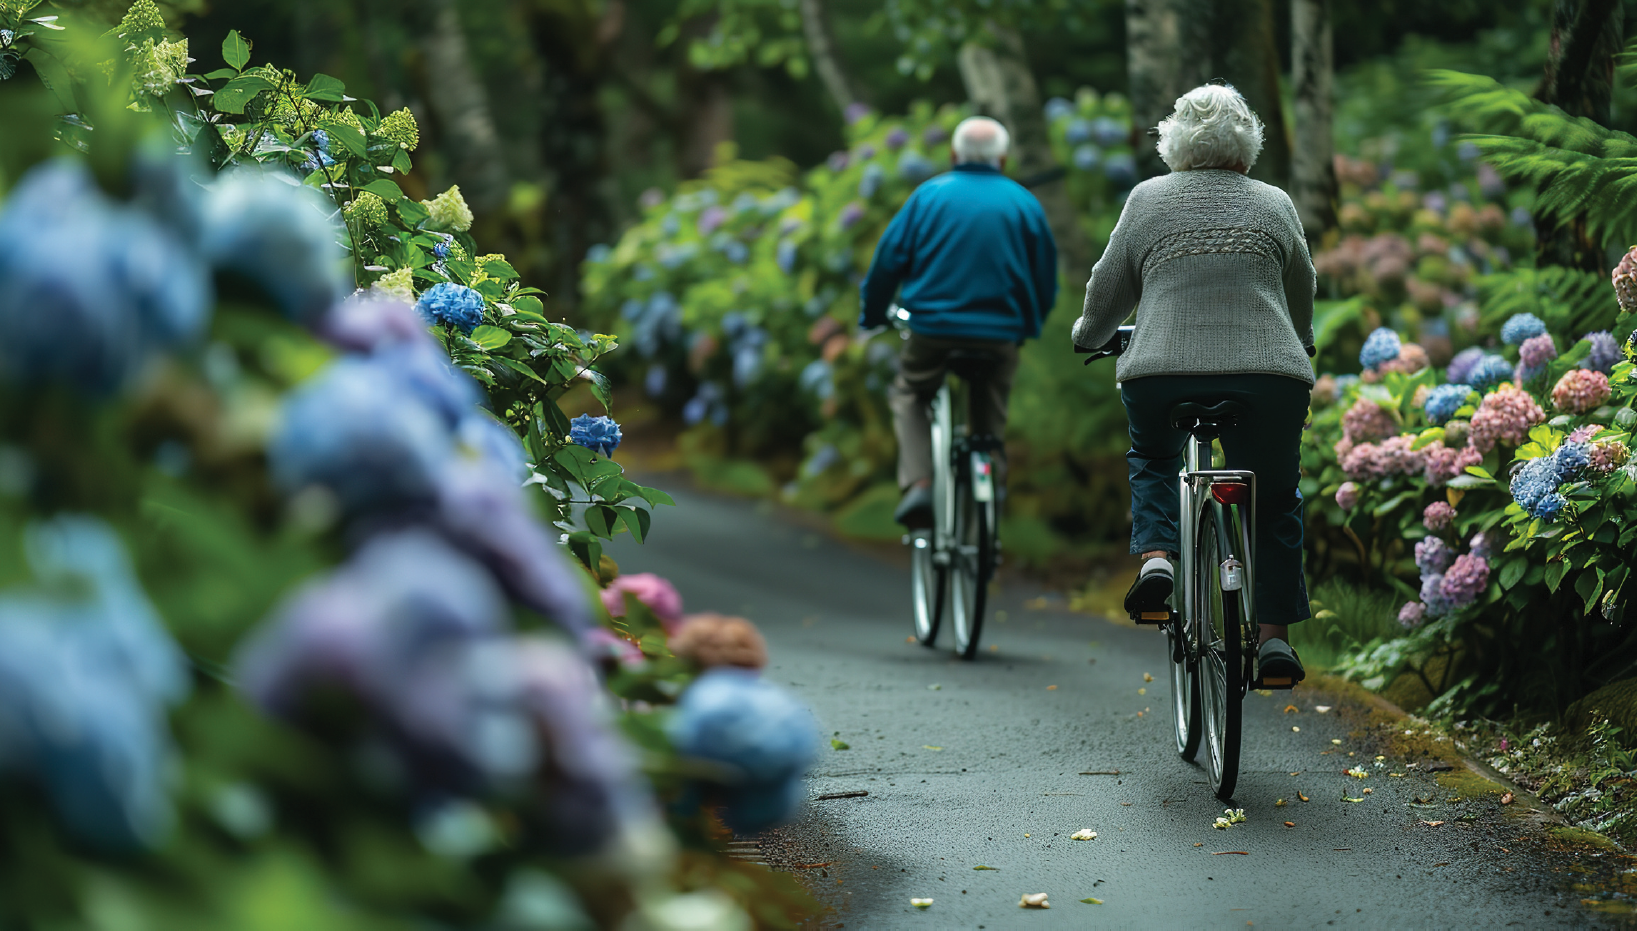 Two older adults ride bicycles down a pathway surrounded by lush greenery and colourful flowers. The image is taken from behind, so only the cyclists' backs appear.